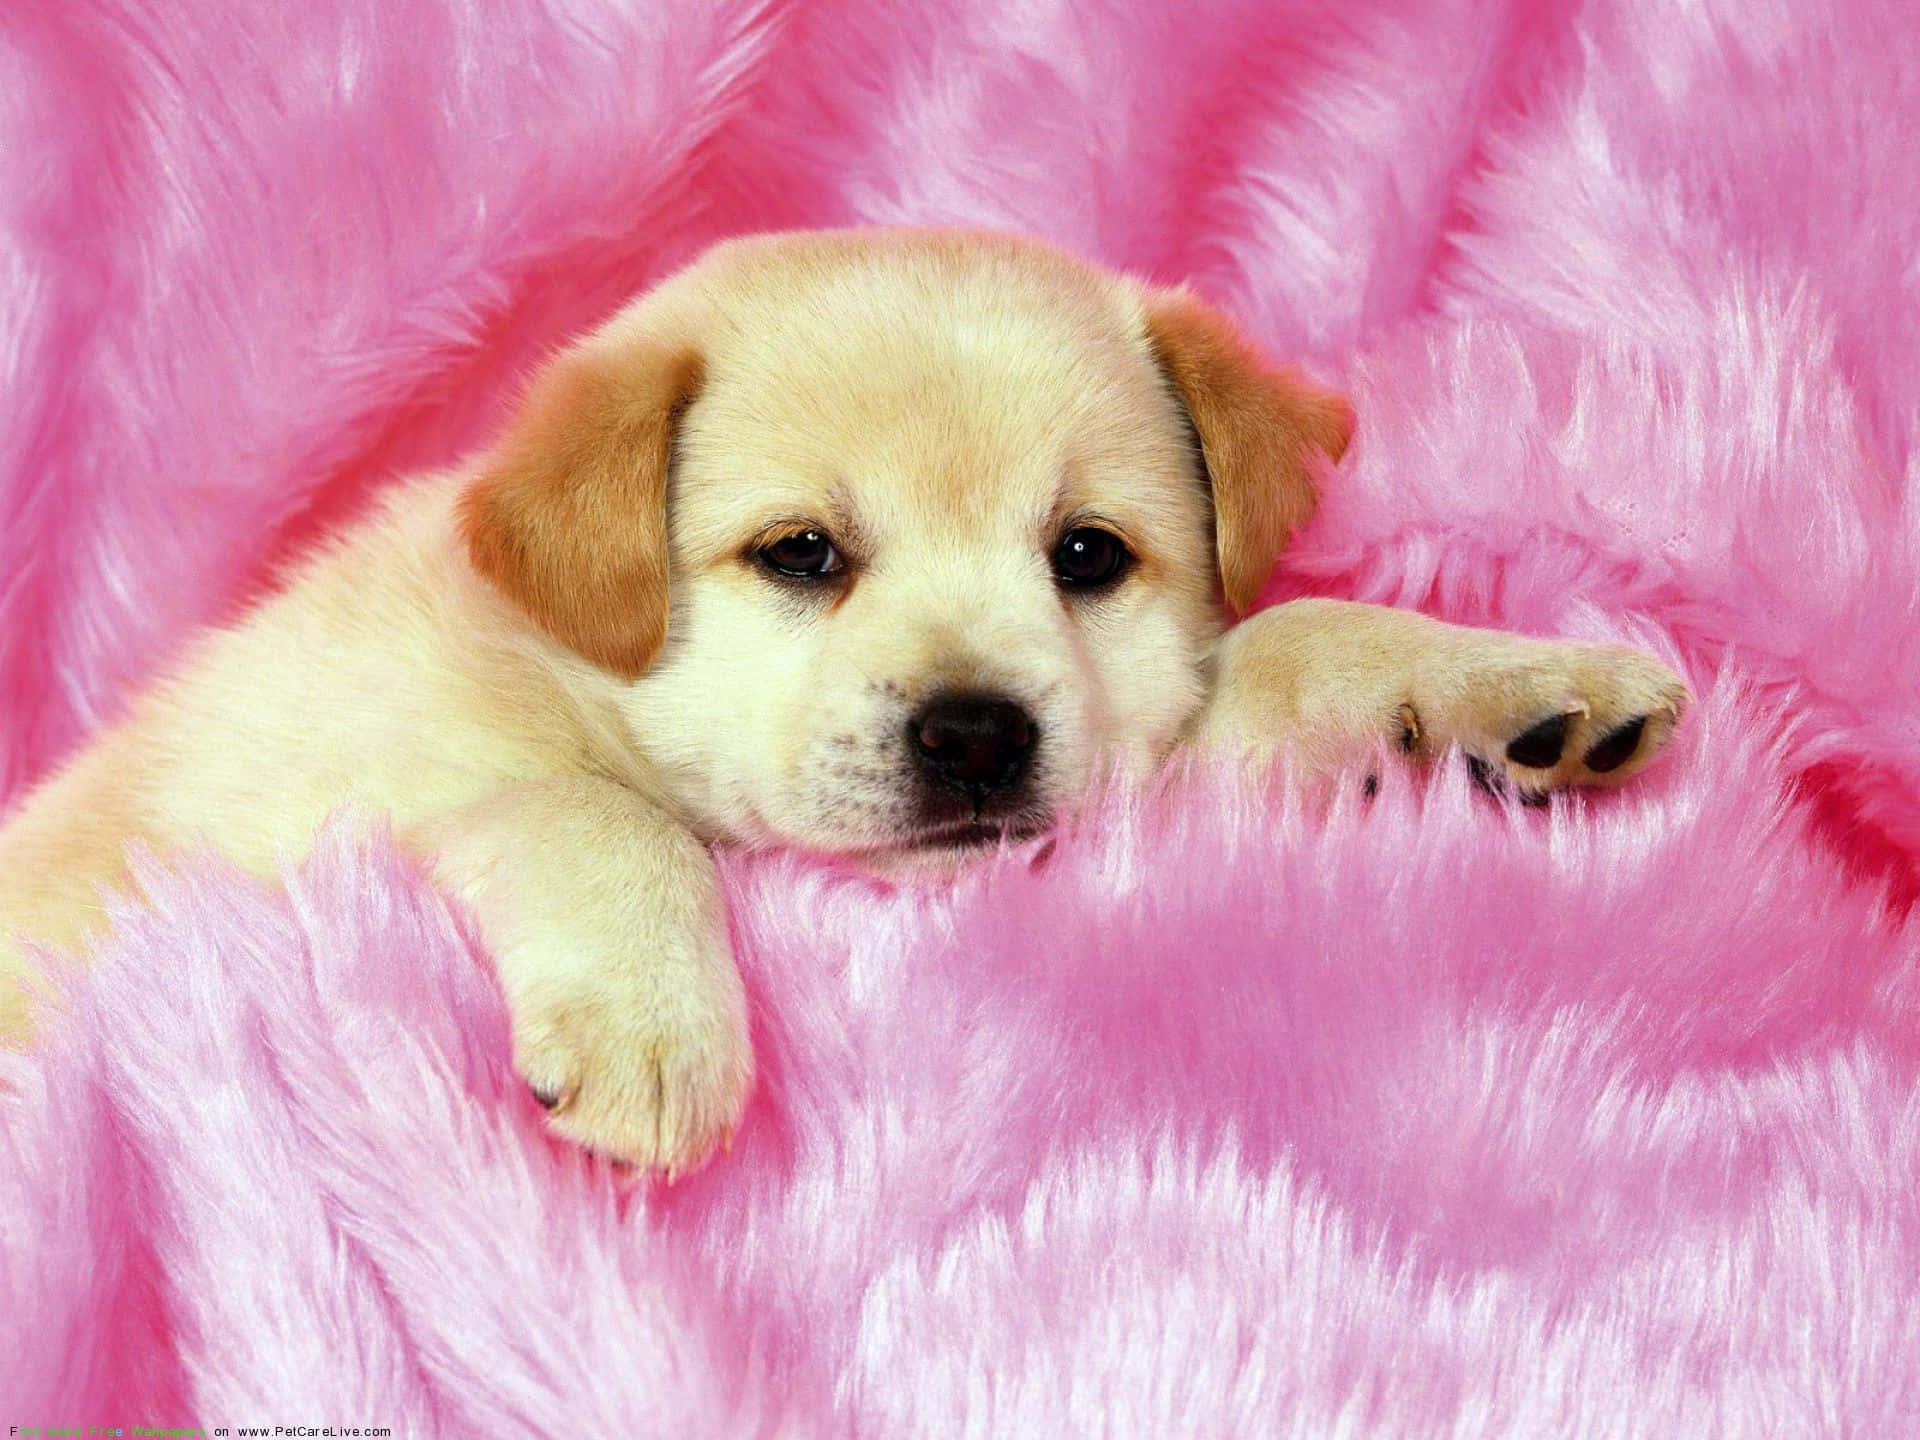 Funny Puppy On Pink Fur Picture